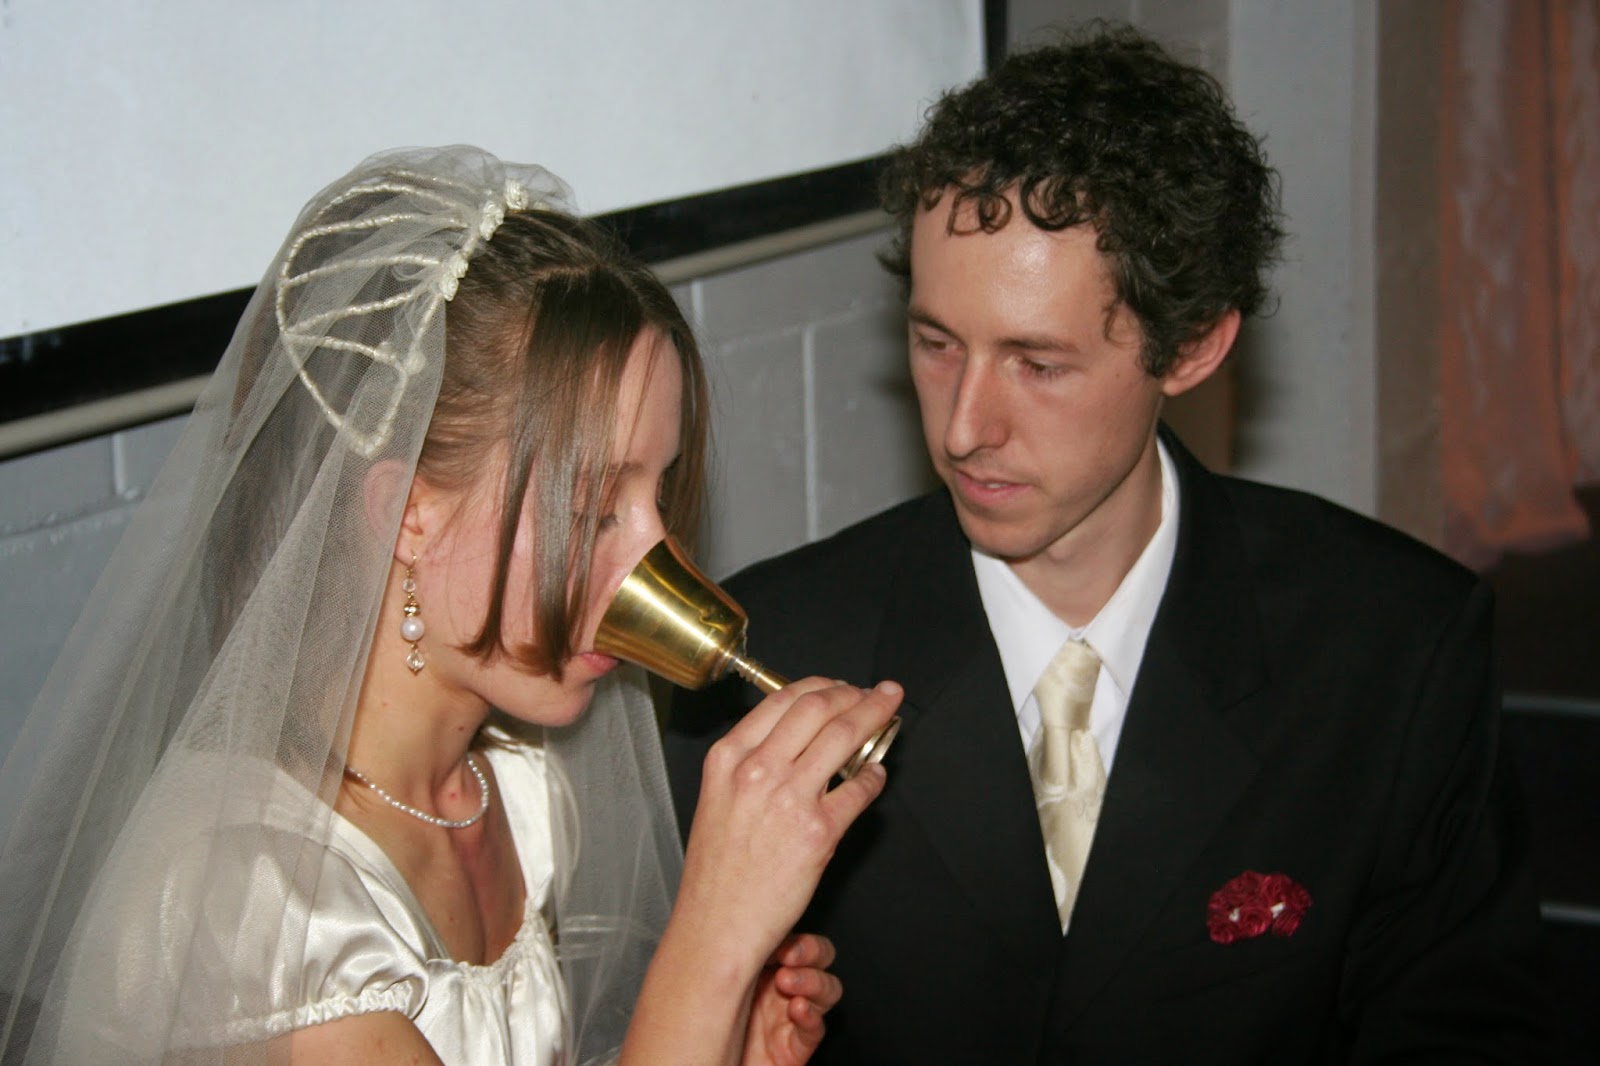 Sharing Communion at our Wedding